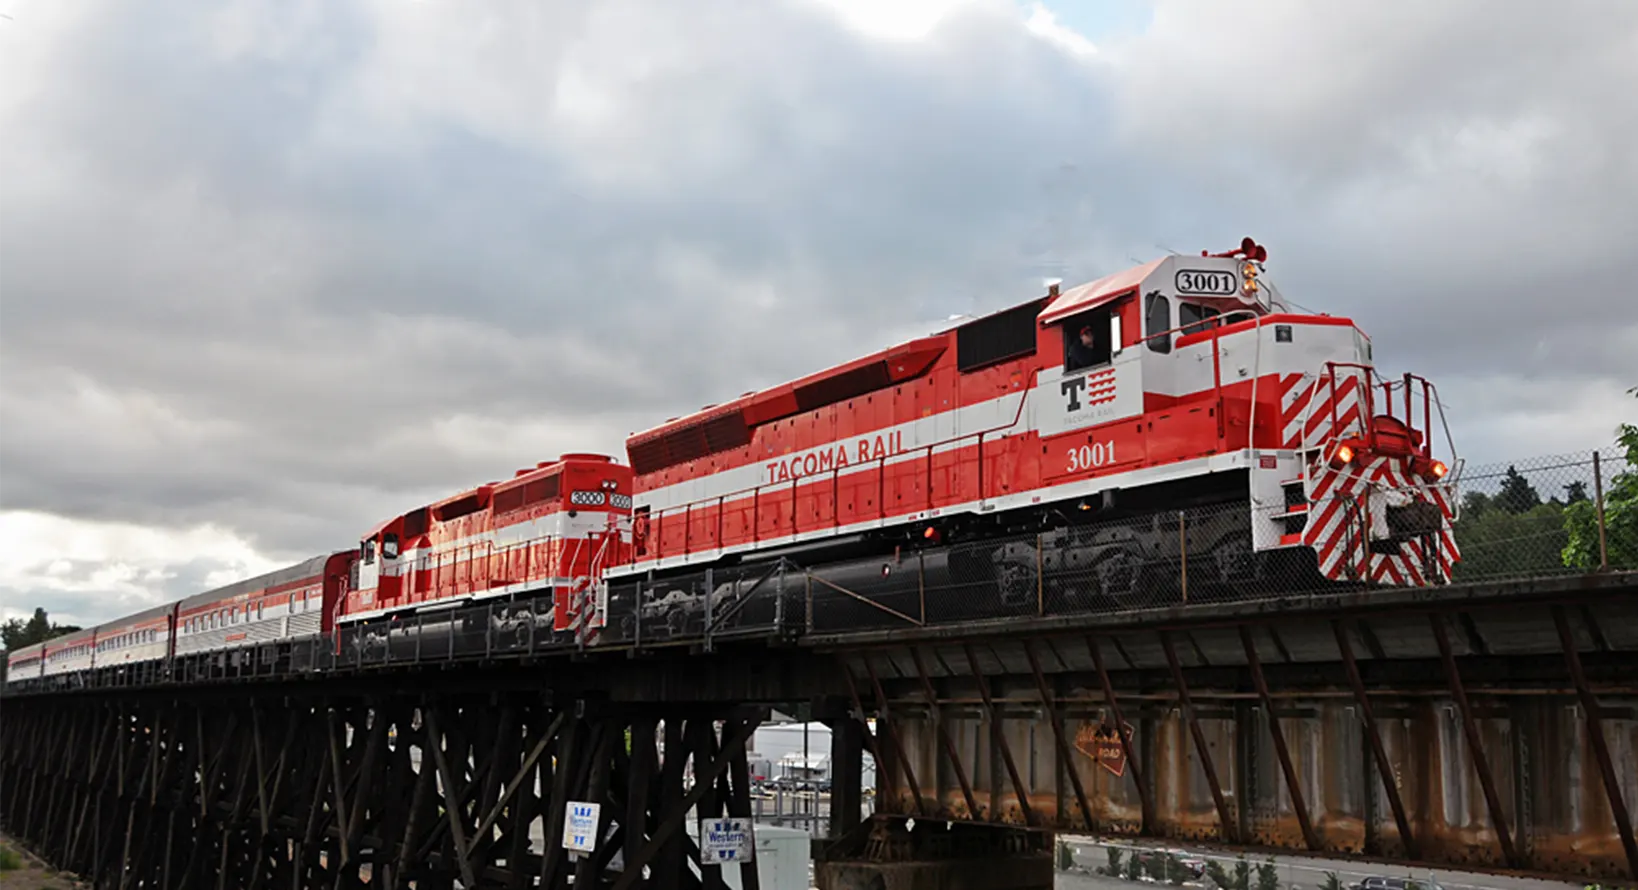 corys wins upgrade contract with us freight operator tacoma rail @drew jacksich